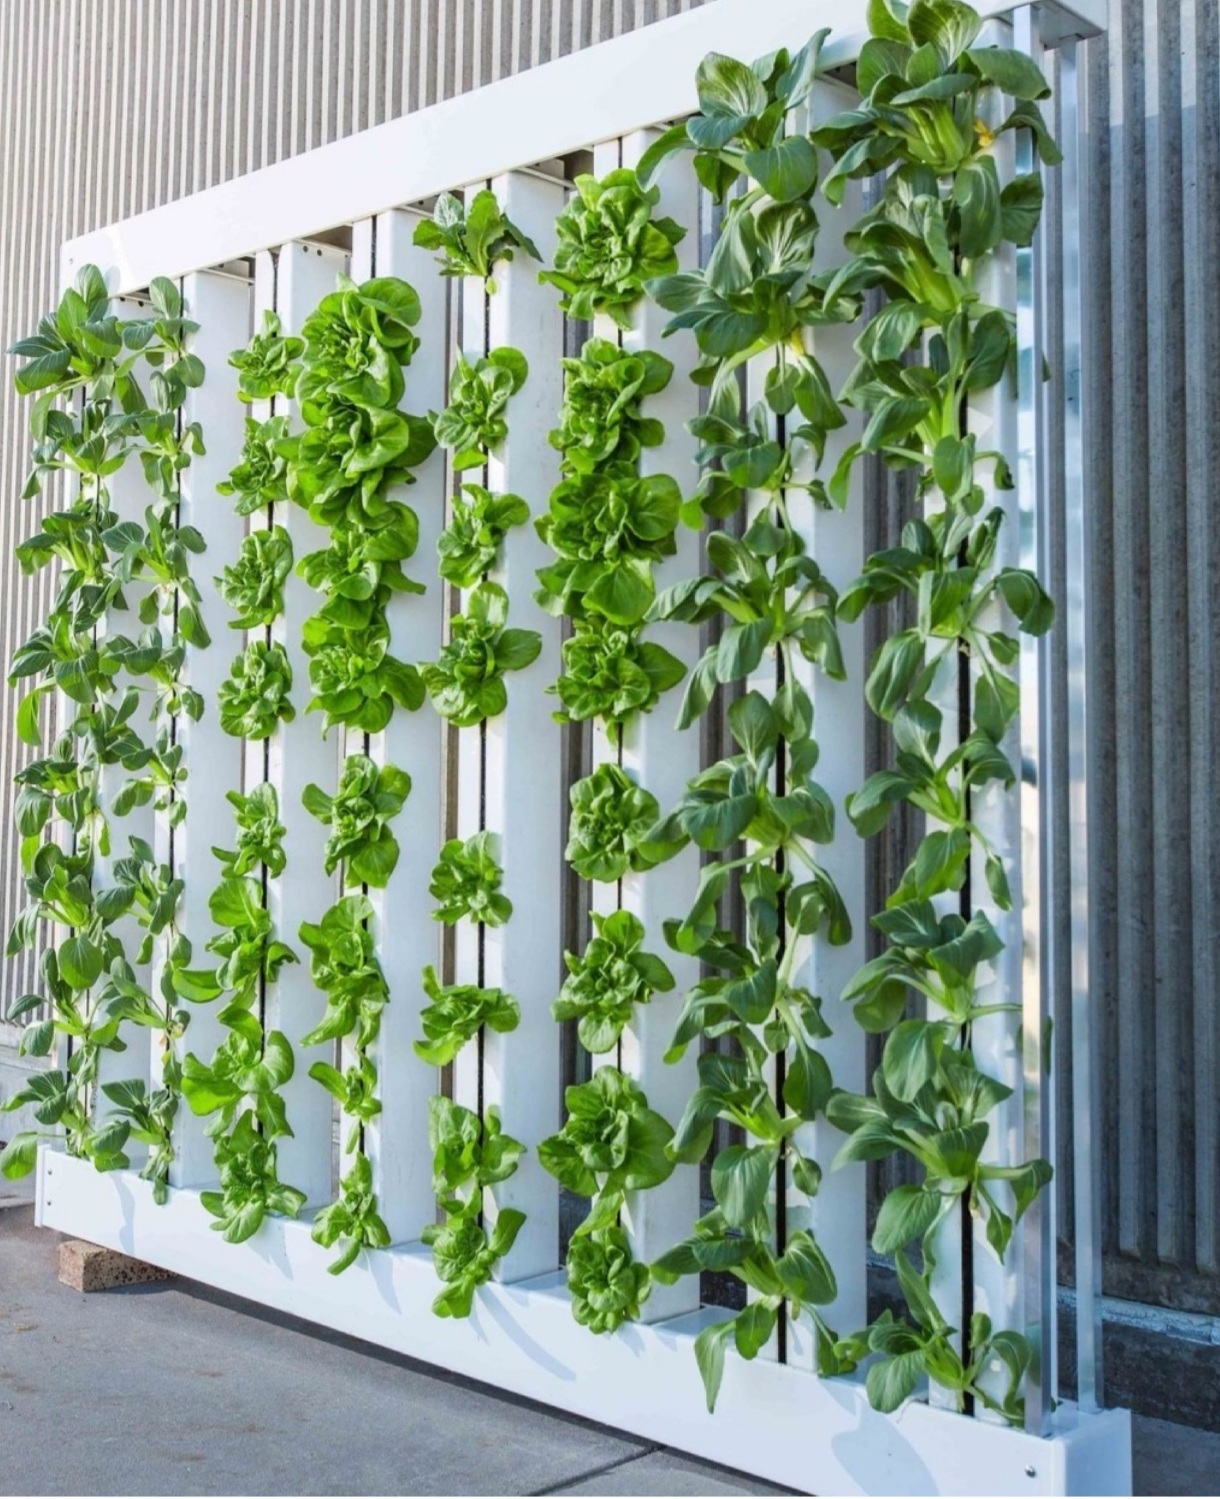 Vertical Farming and How it’s Revolutionizing Agriculture